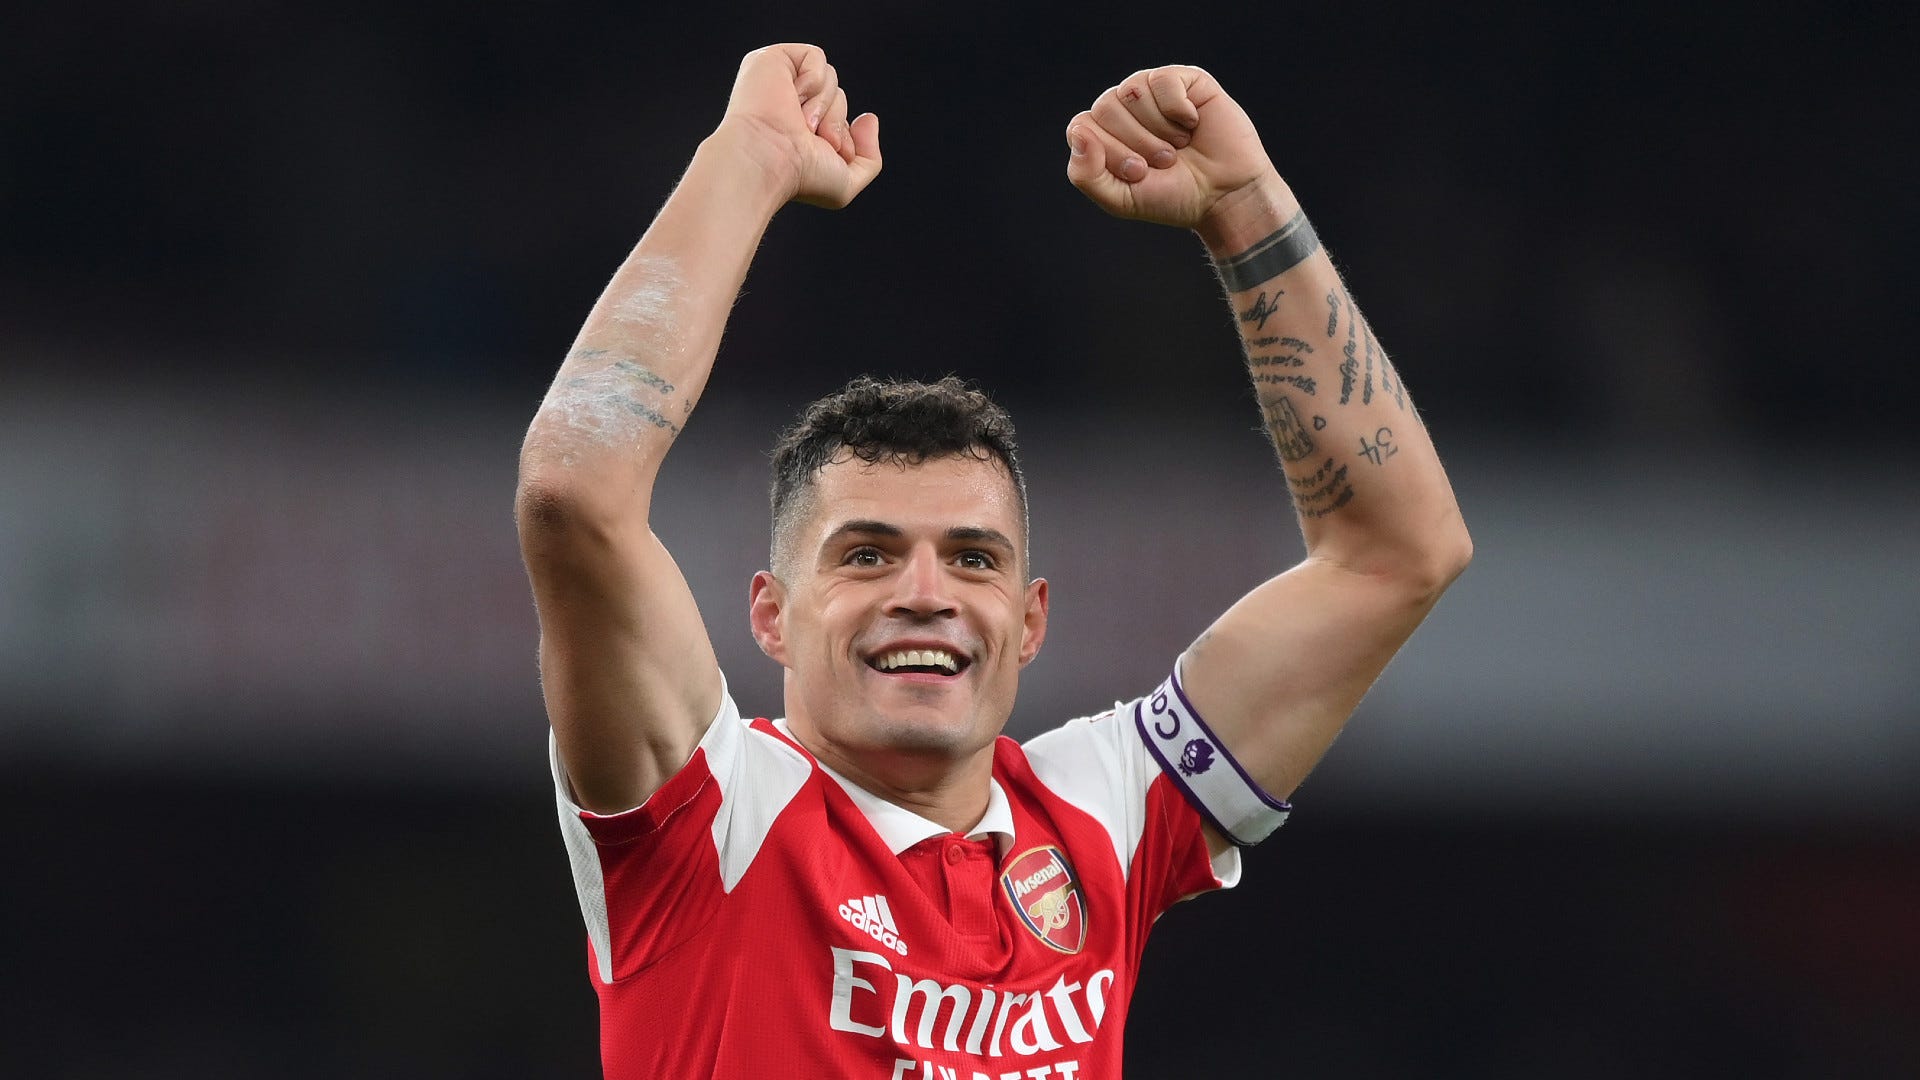 'That is not at all true!' - Granit Xhaka hits back and reveals real reason he decided to leave Arsenal